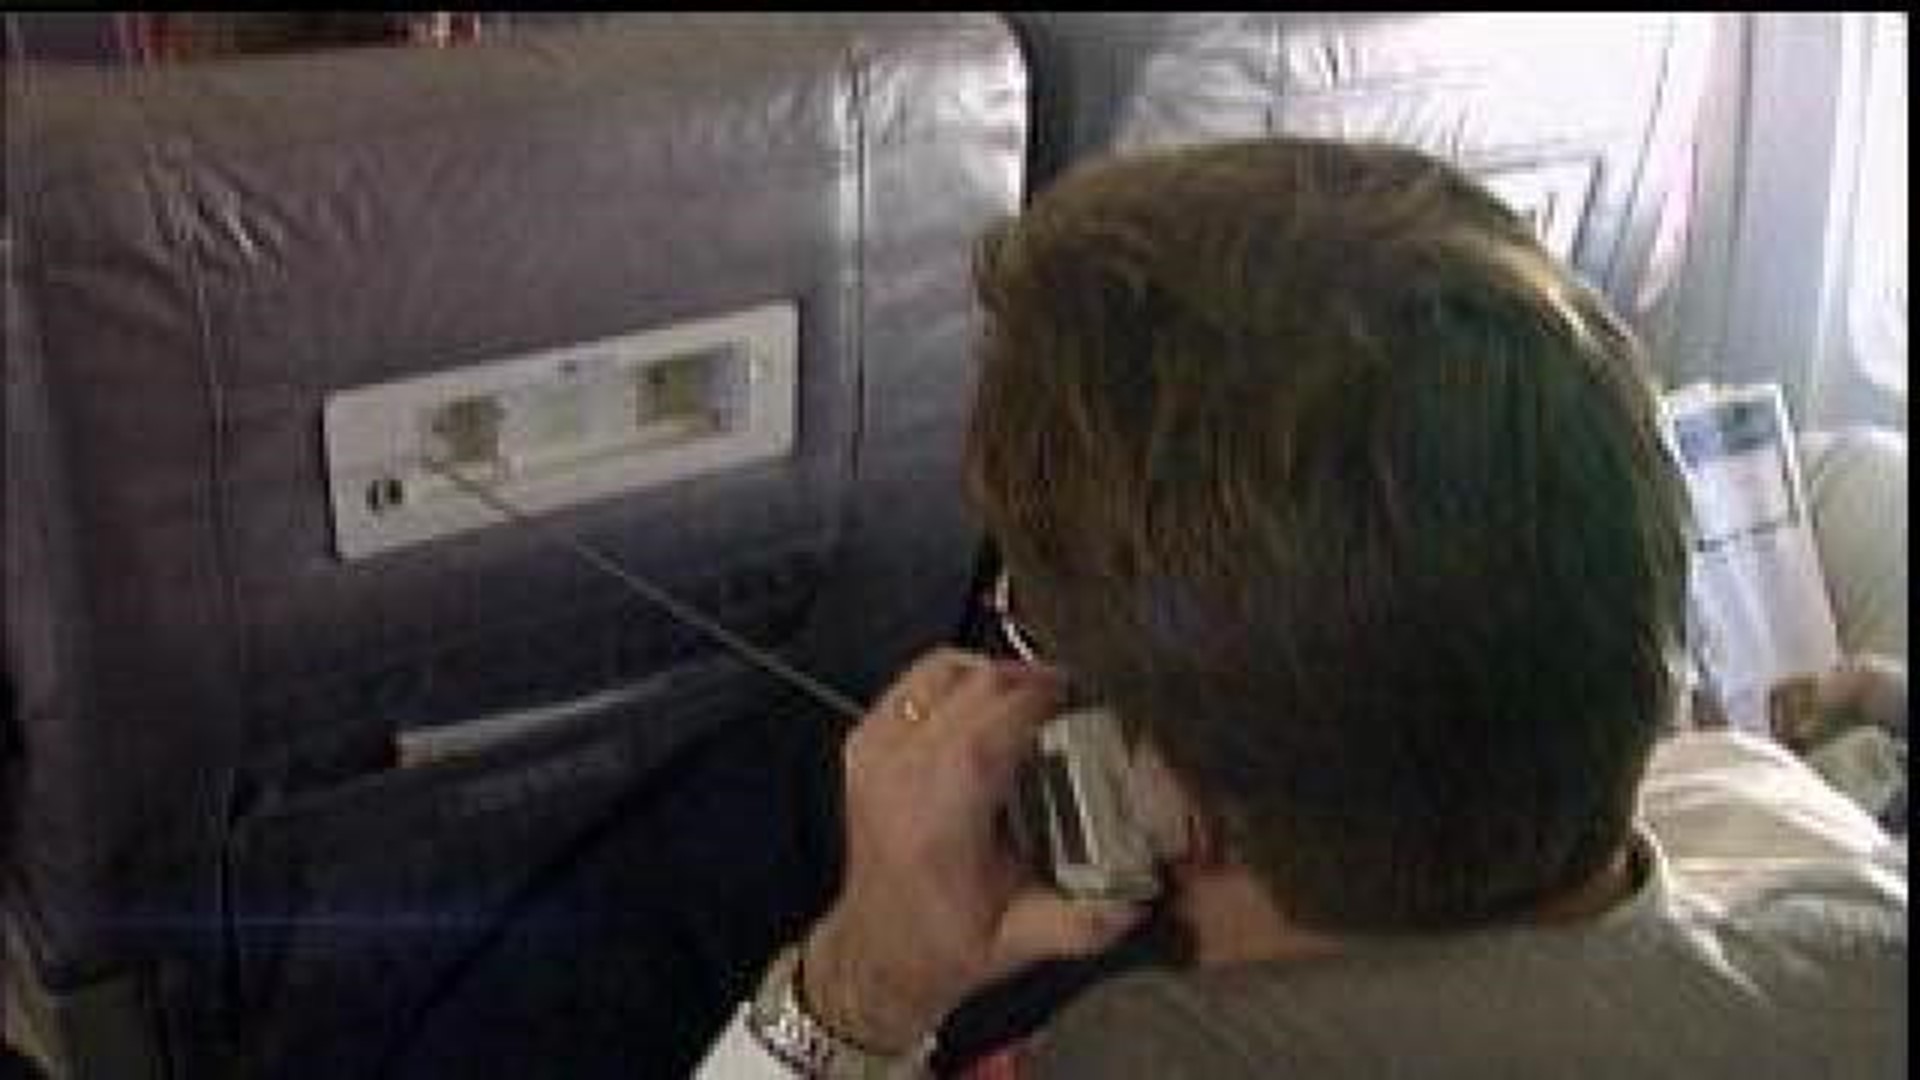 Proposal to allow in-flight cellphone use